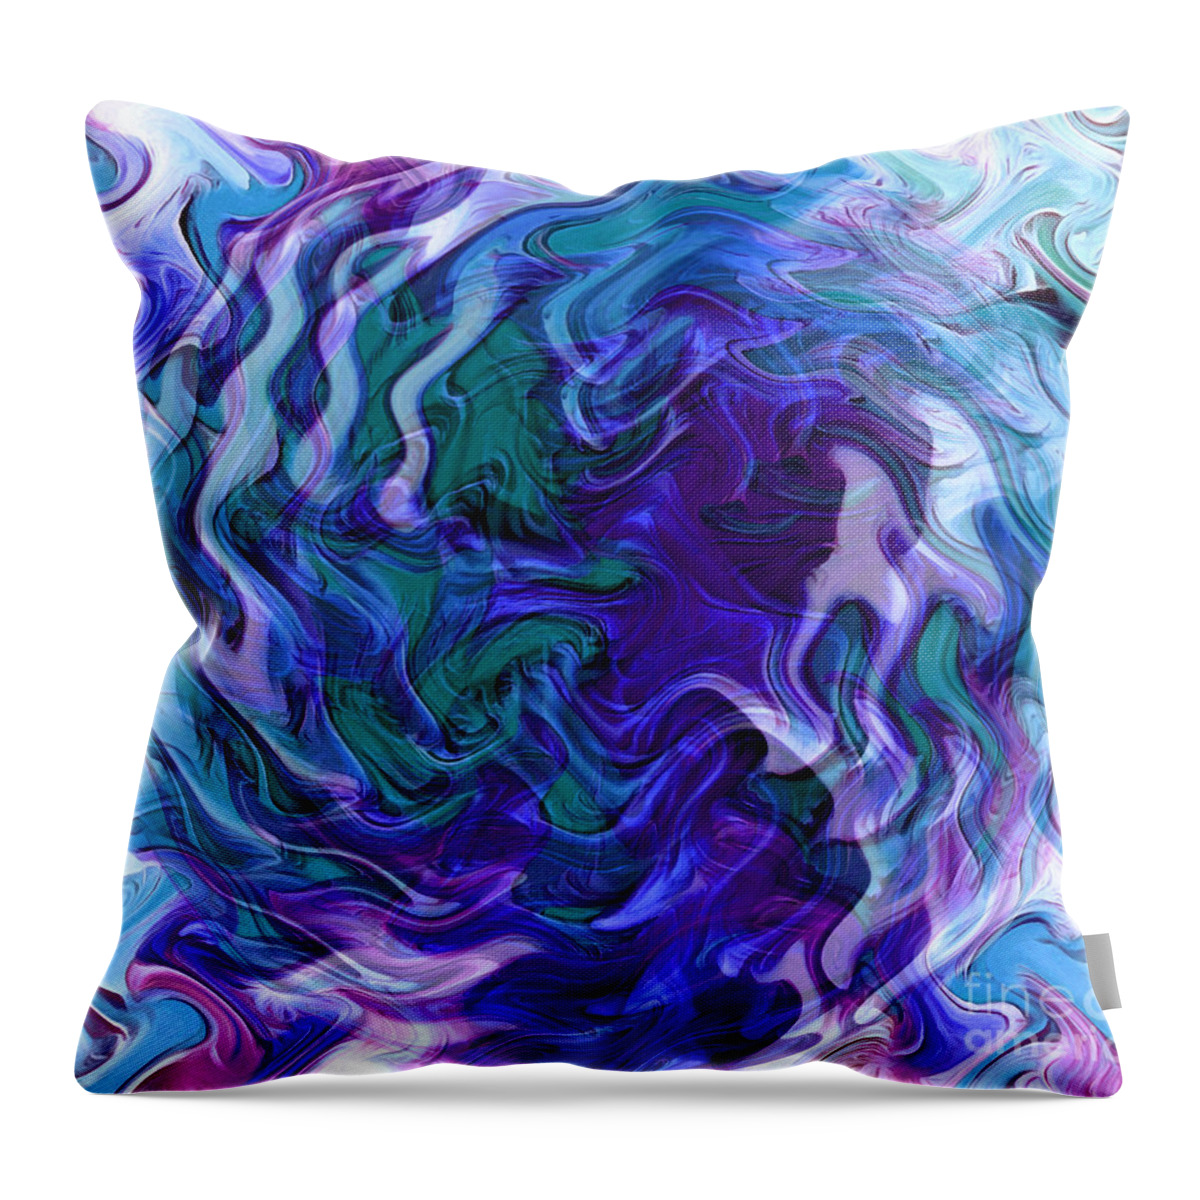 New Age Throw Pillow featuring the digital art Revival by Krissy Katsimbras